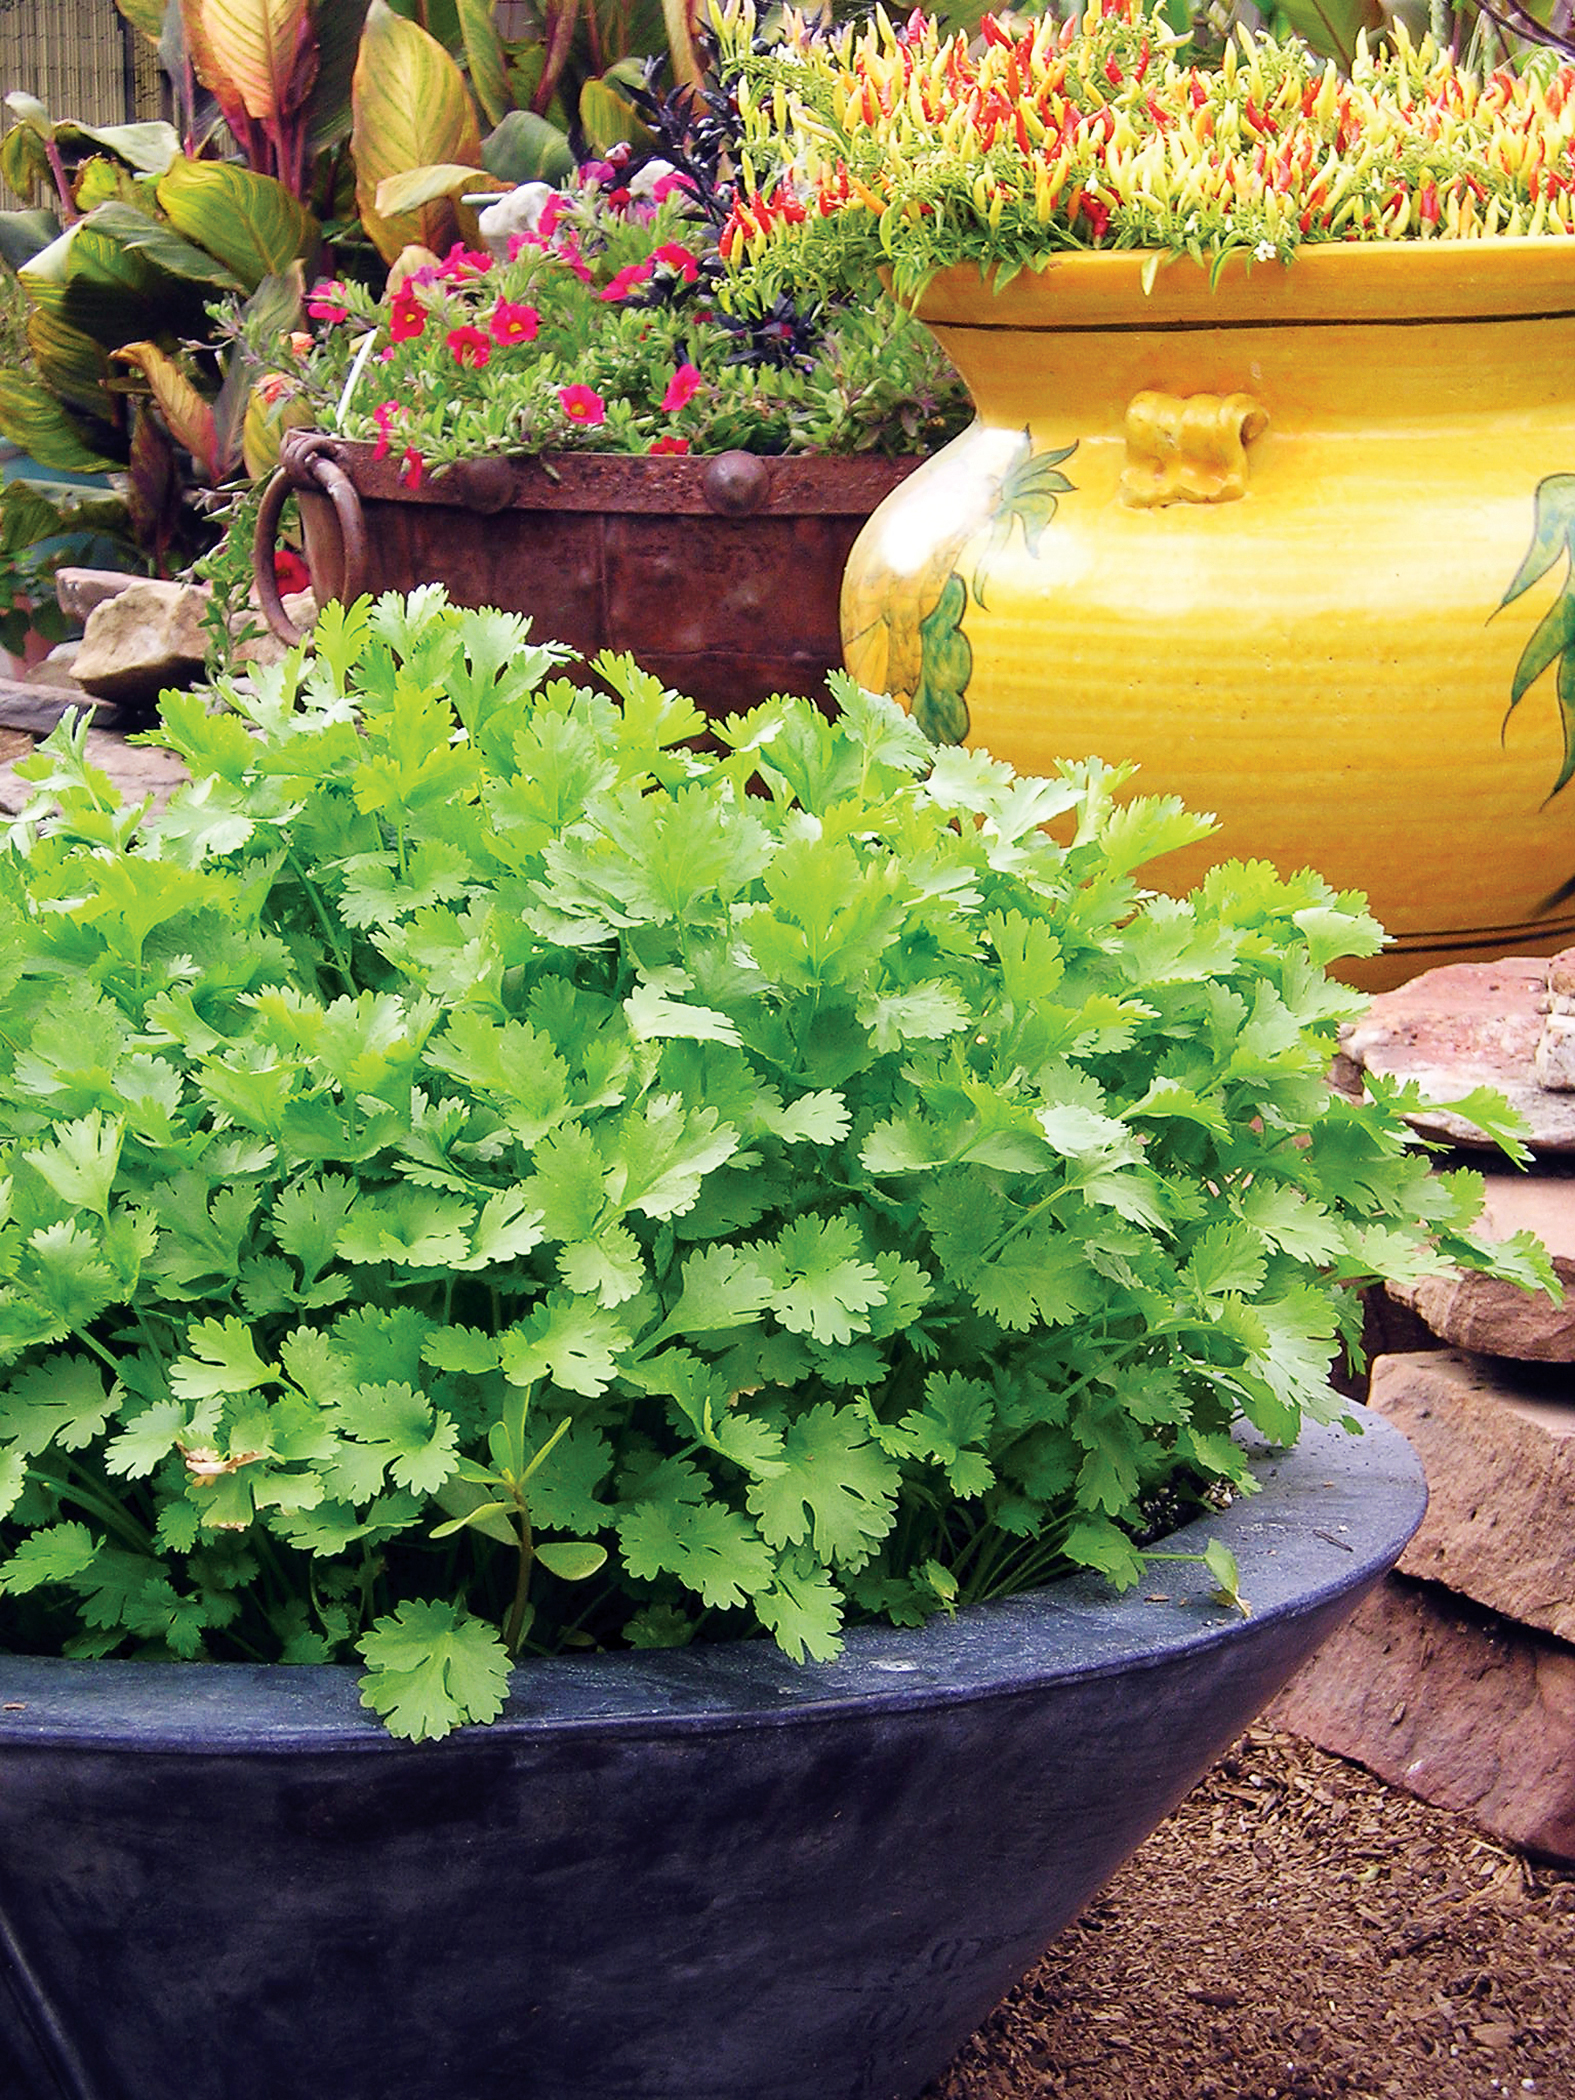 Growing Cilantro in Florida: Tips and Tricks for a Great Harvest